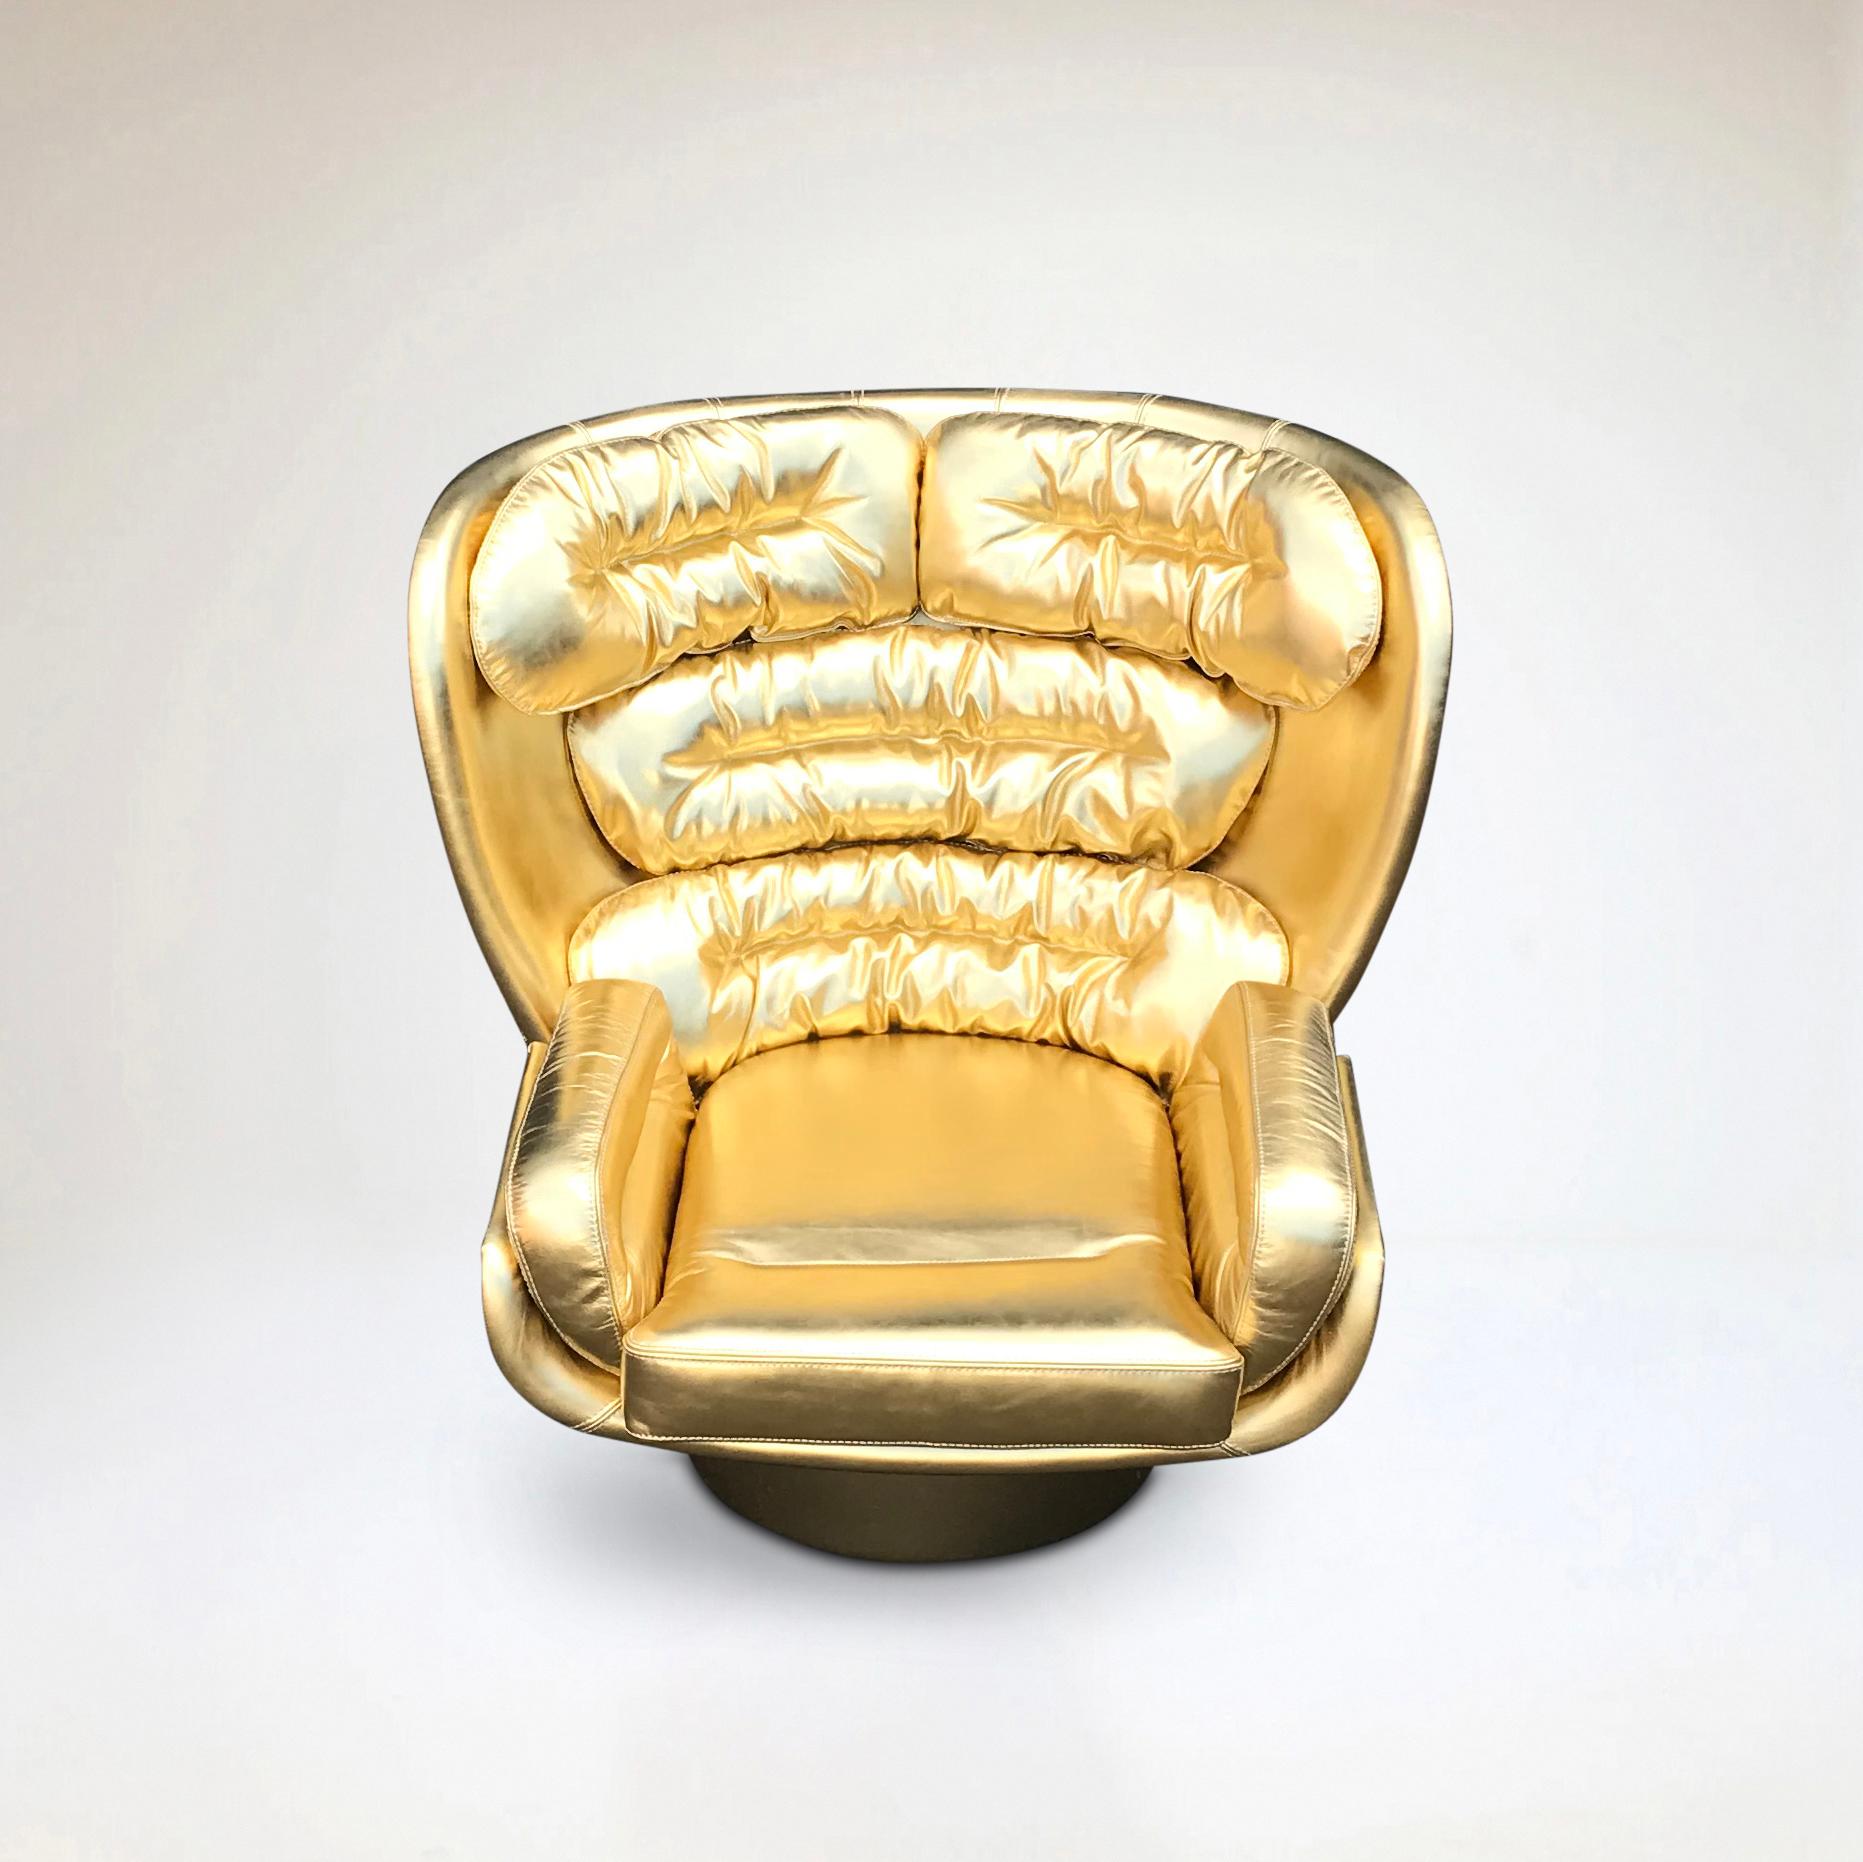 Golden Limited Edition Elda Chair by Joe Colombo for Longhi Italy no. 7/20 For Sale 5